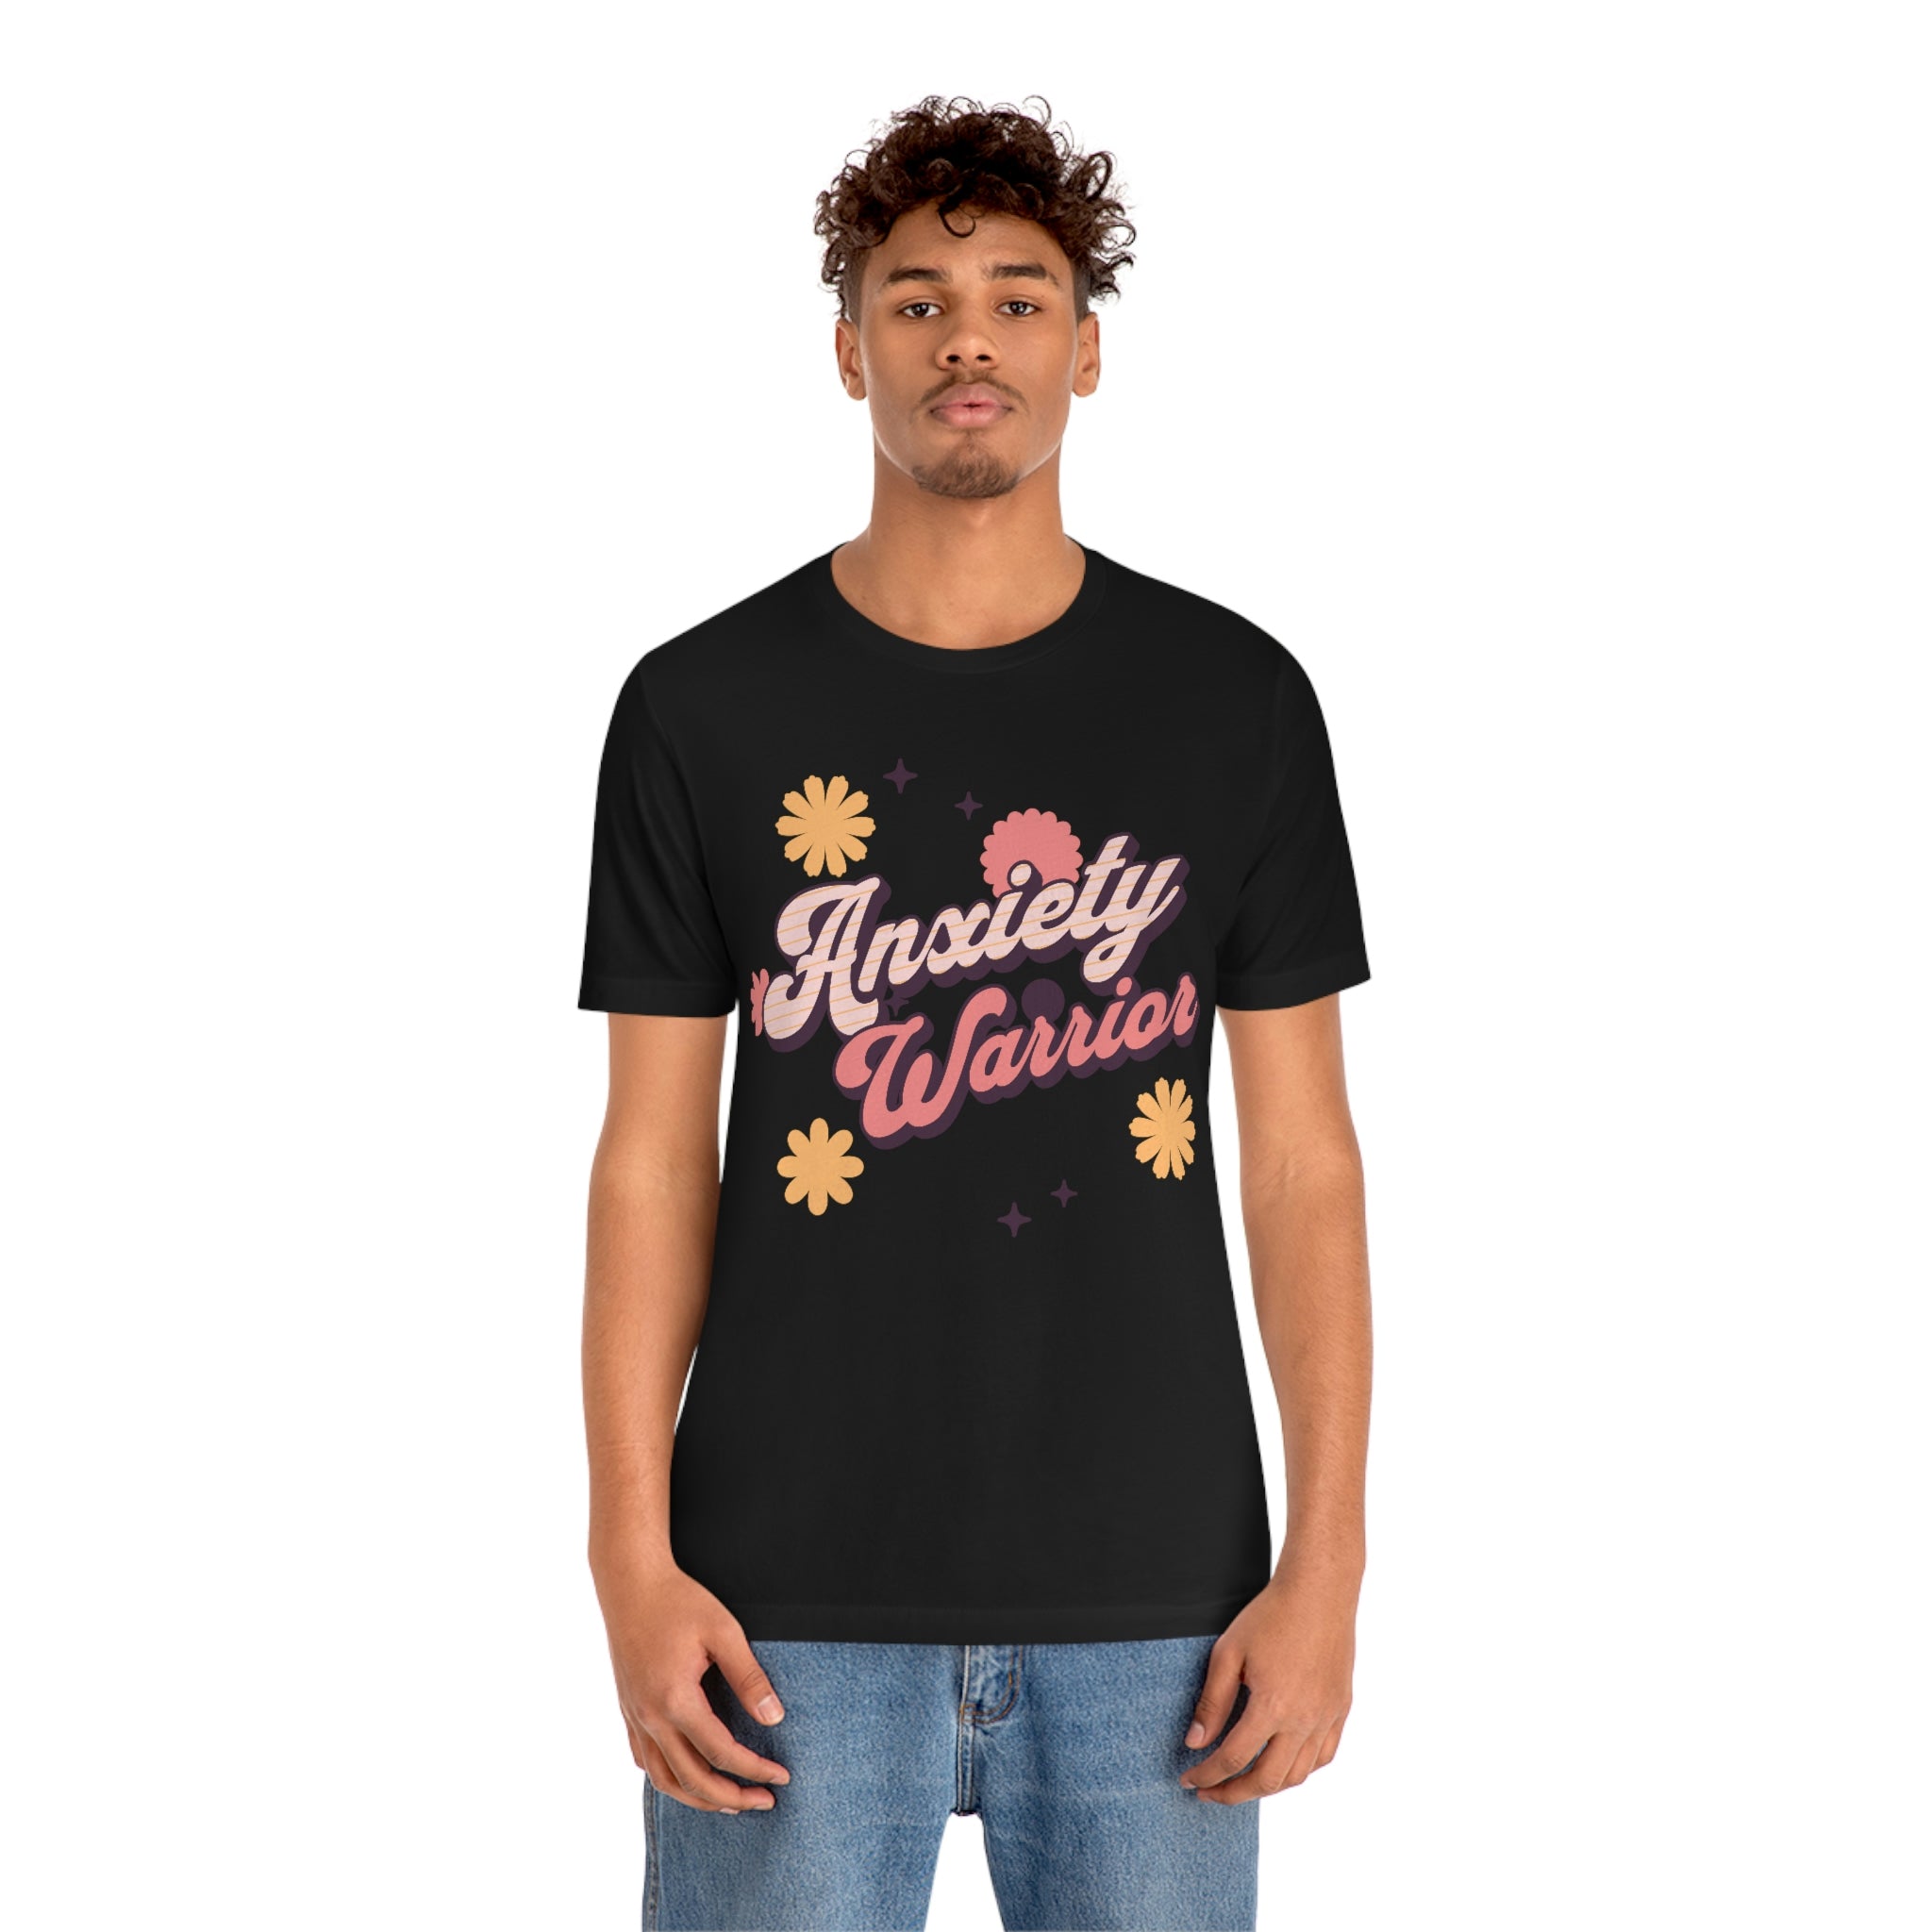 Anxiety Warrior Shirt For Those that Struggle With Anxiety